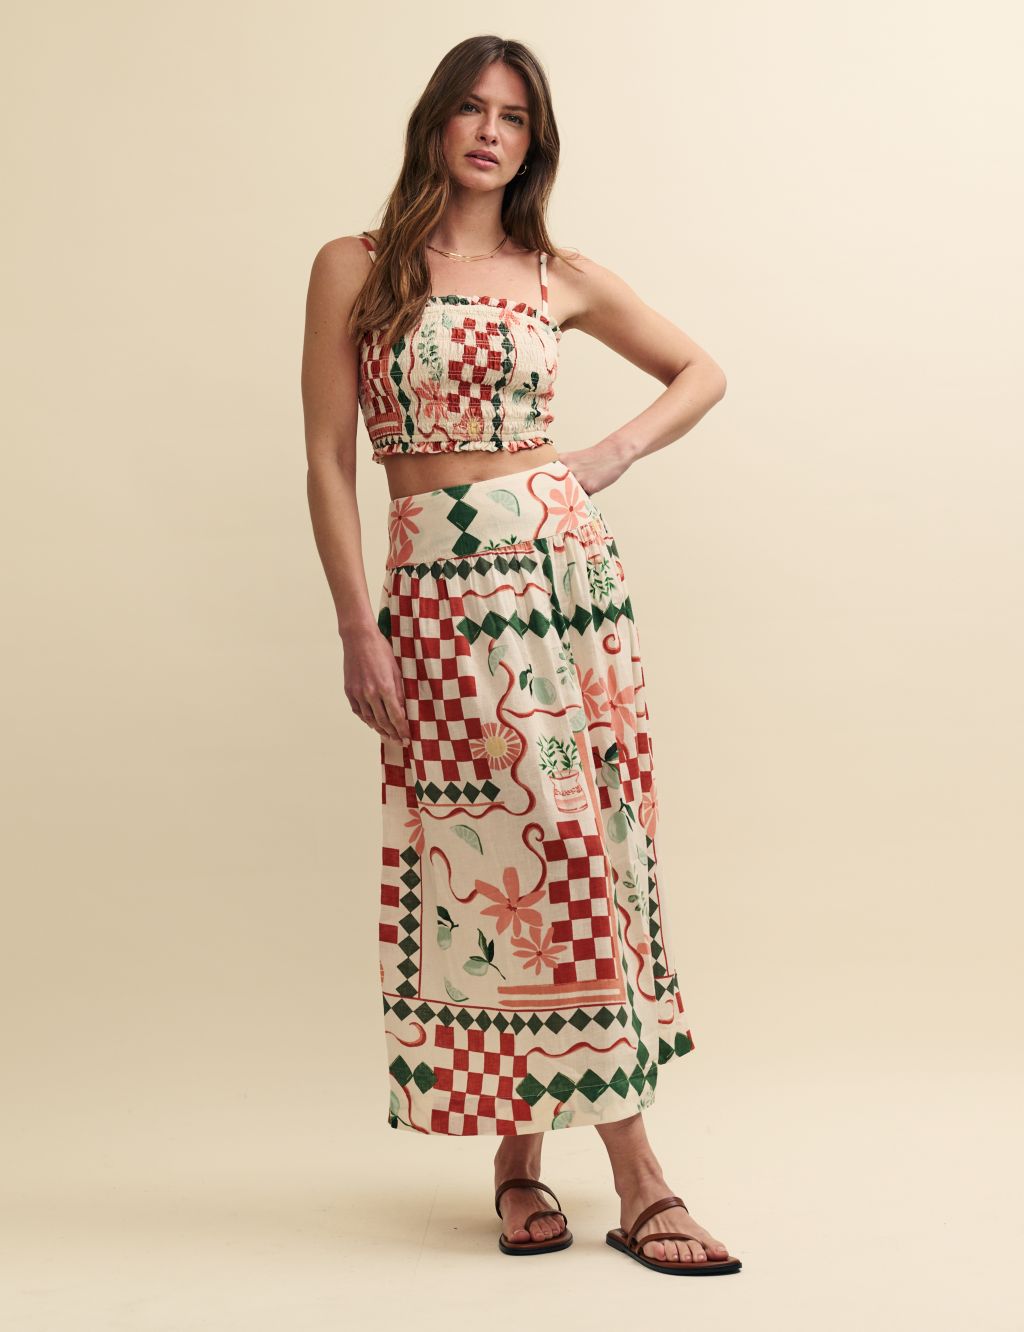 Printed Maxi A-Line Skirt with Linen